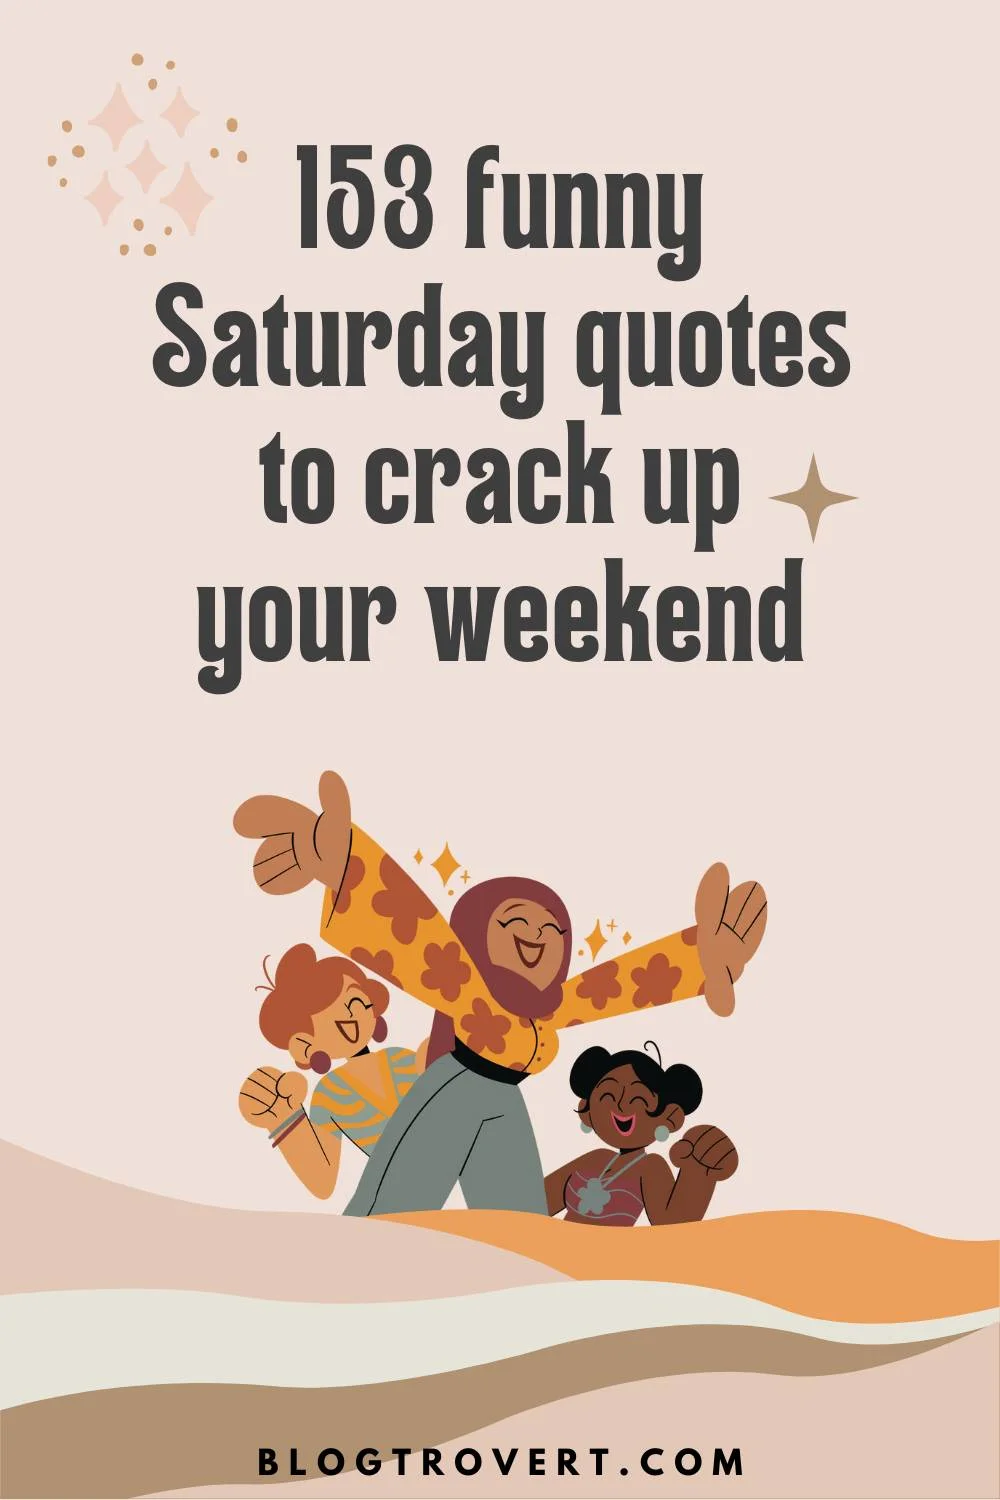 Best 70 Funny Sunday Quotes and Sayings - Quotes Yard